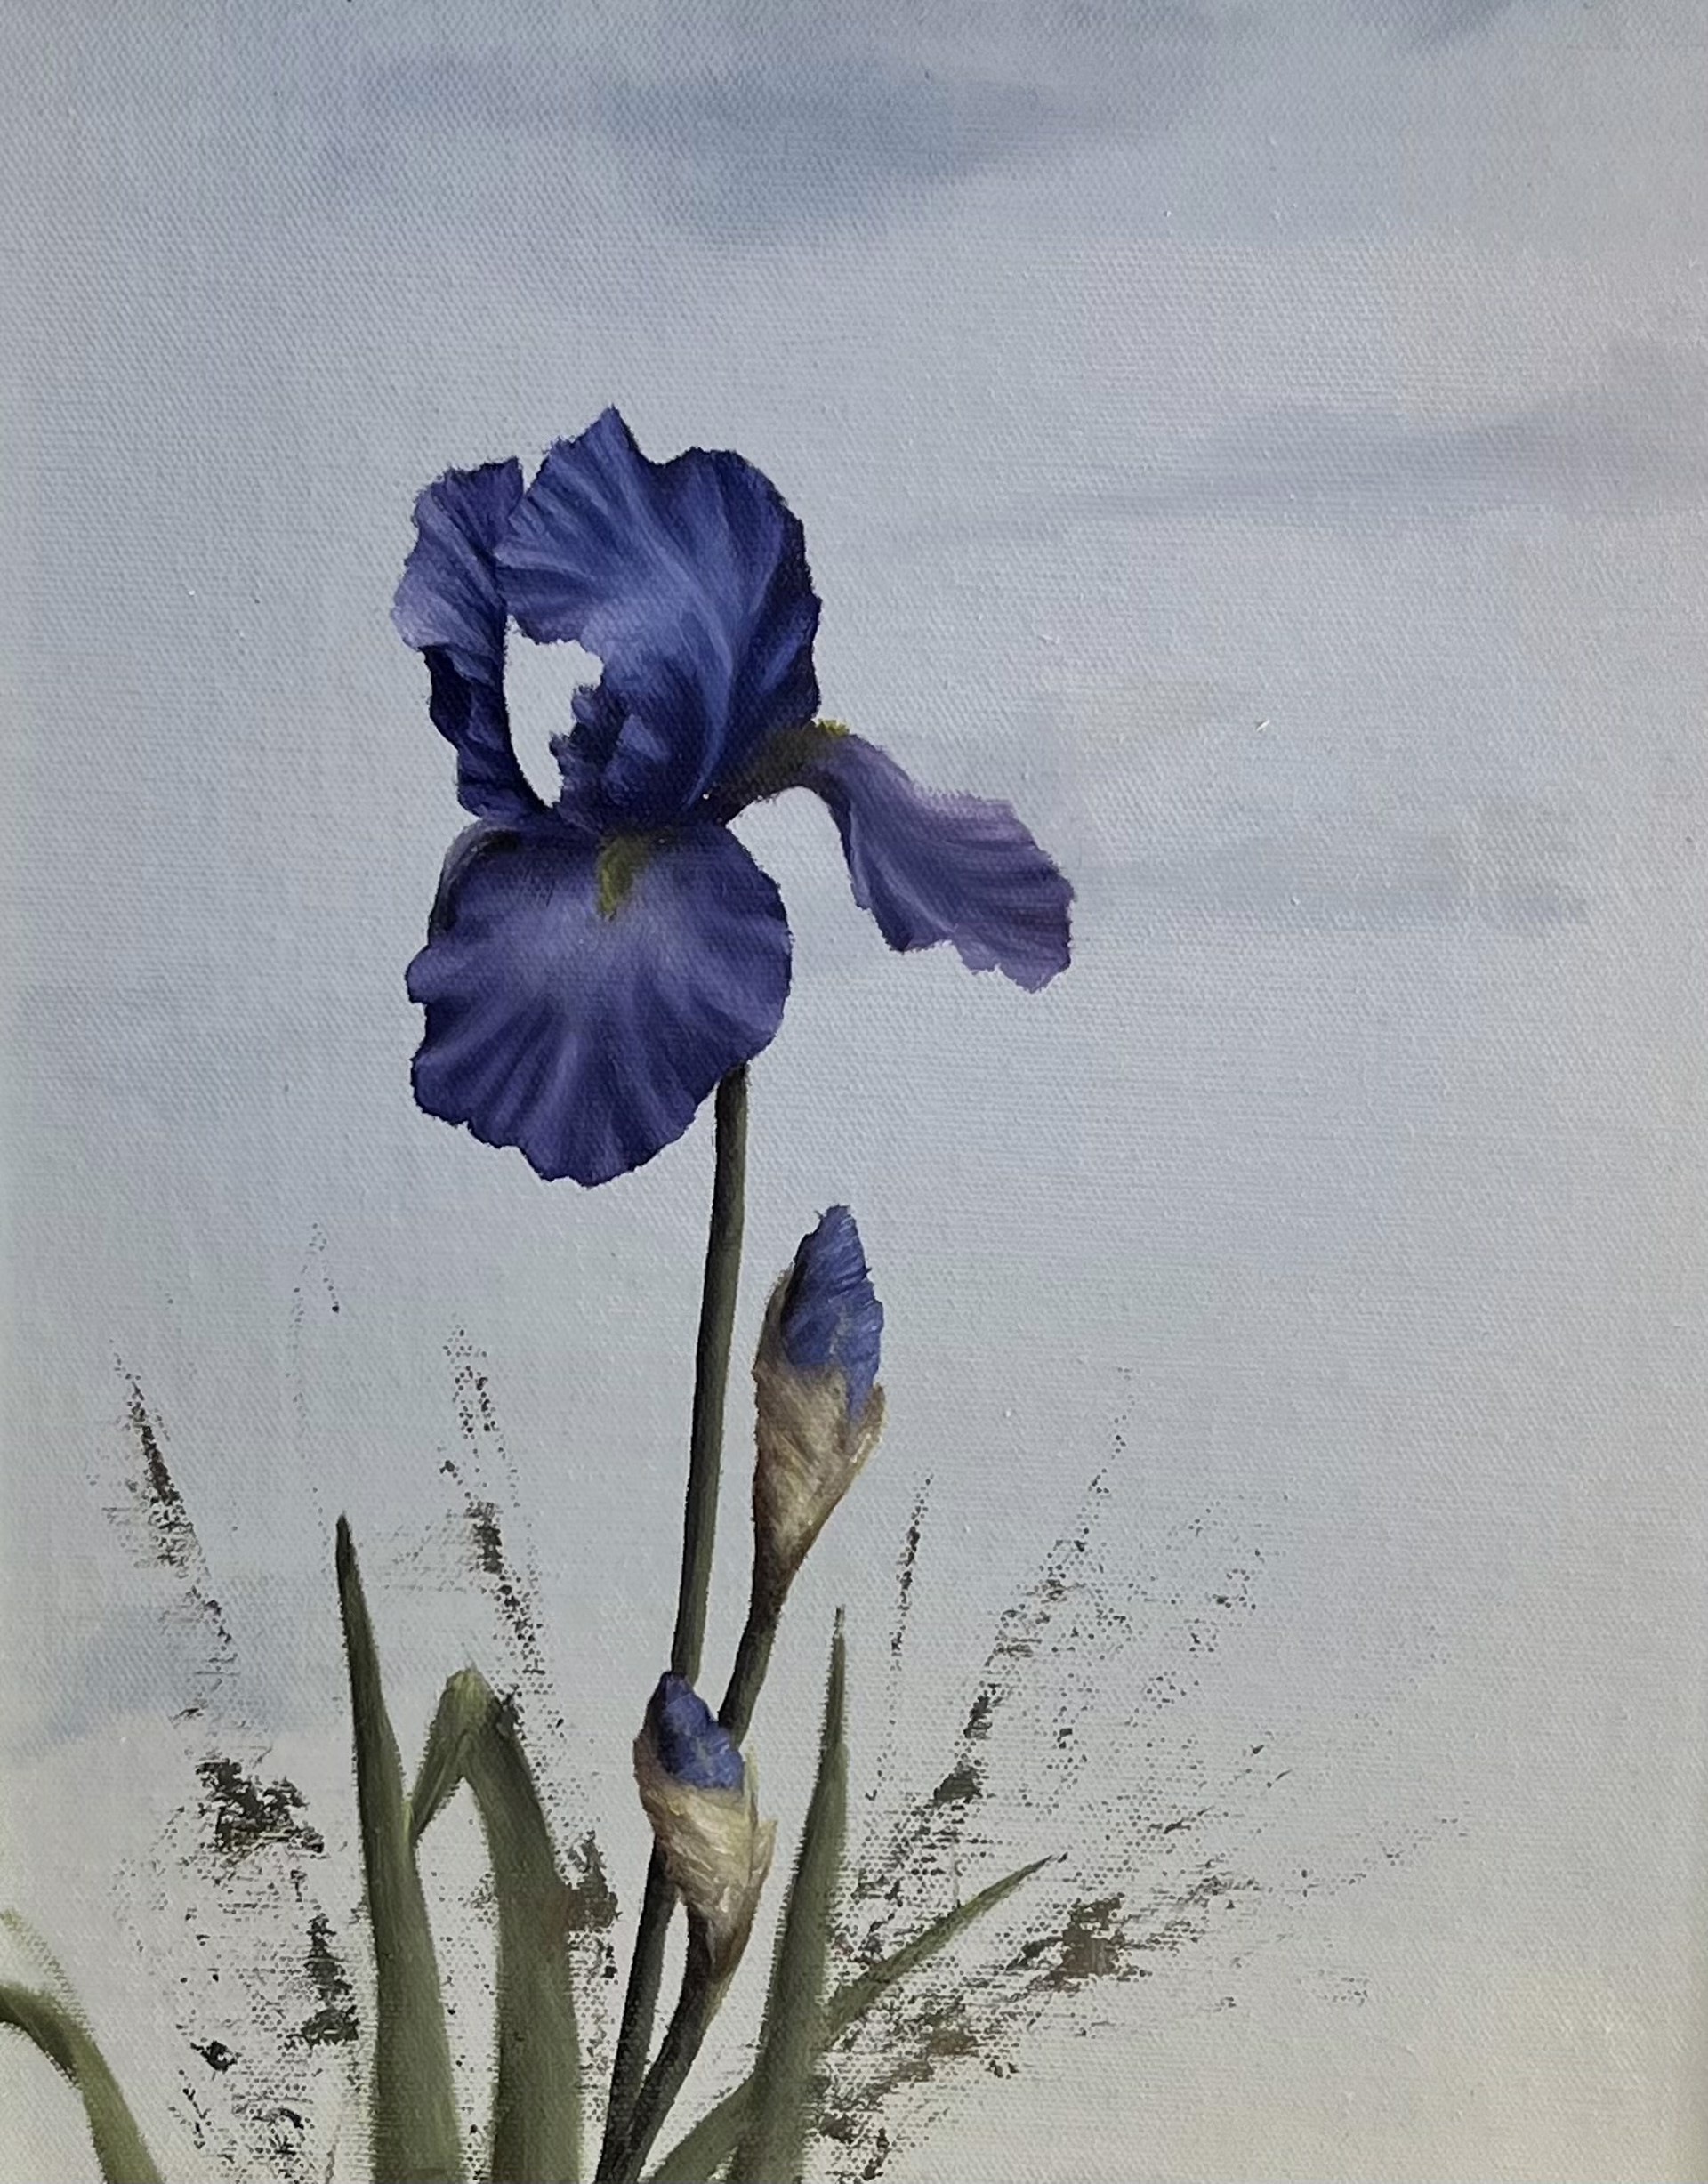 Iris by Gregory Smith